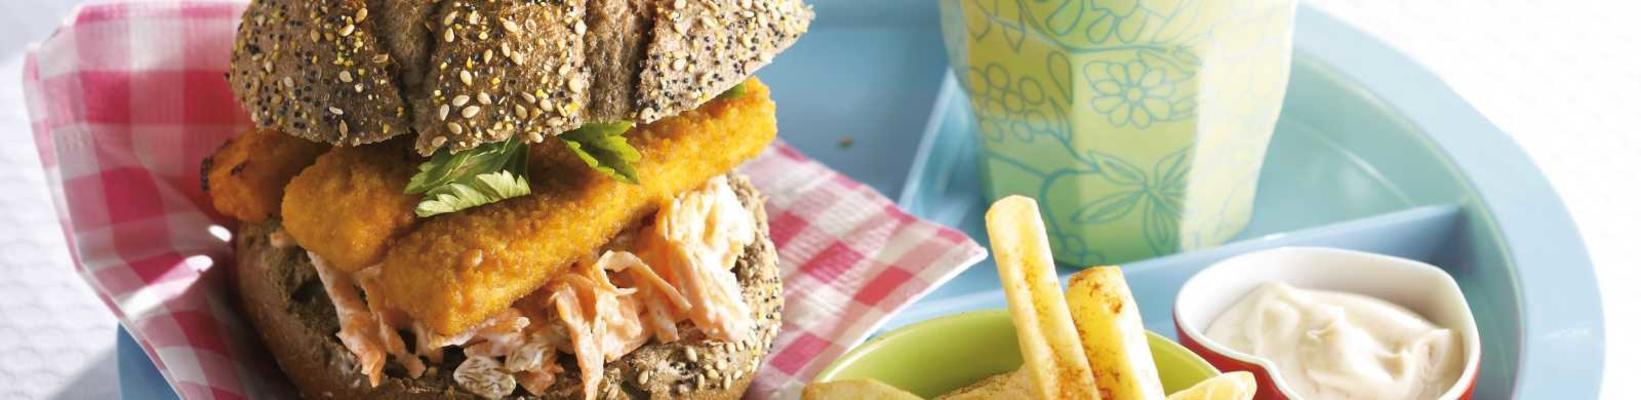 fish burger with carrot vermicelli